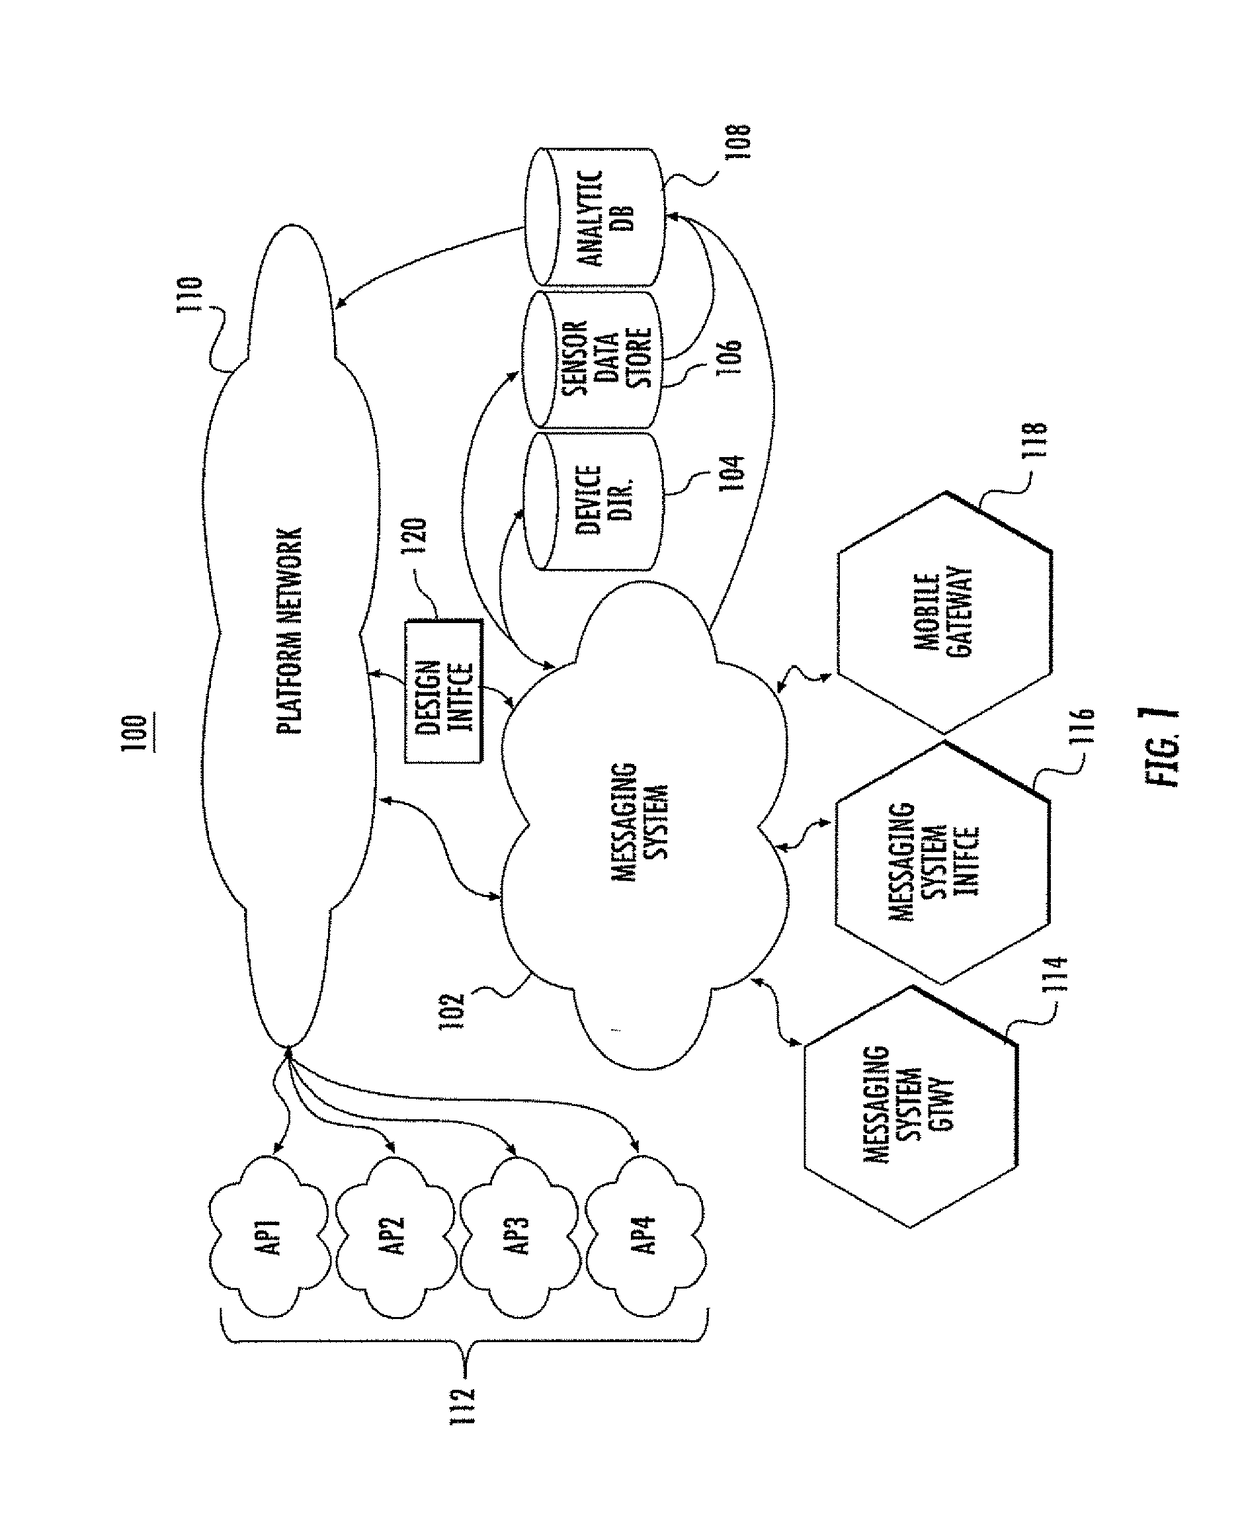 System and method for controlling internet of things devices using namespaces